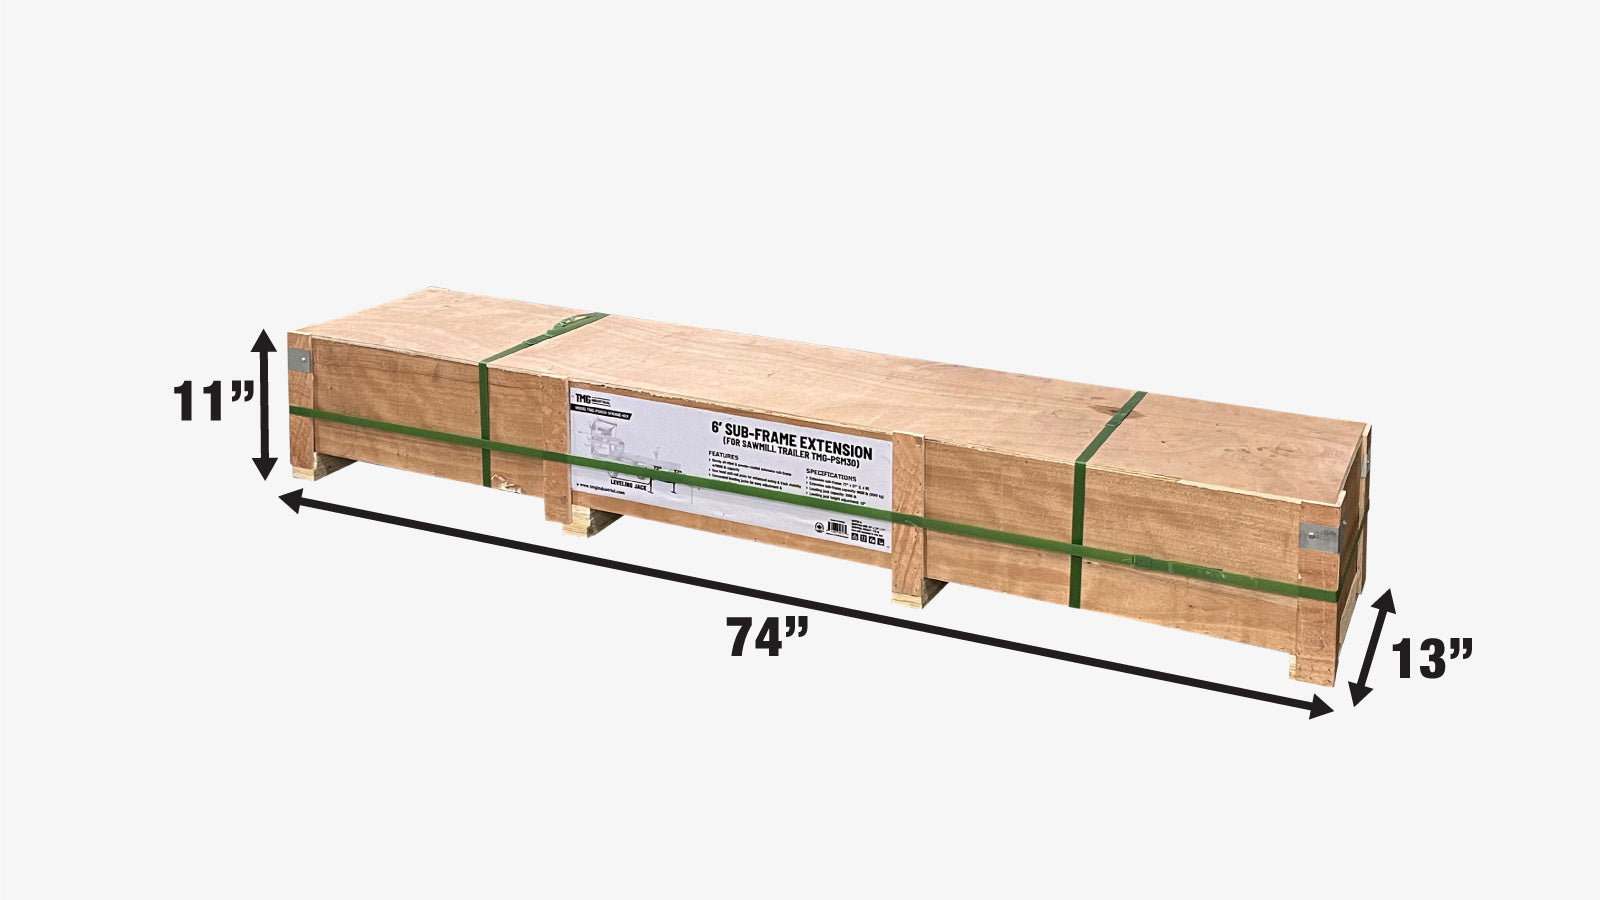 TMG Industrial 6’ Extension Sub-Frame for TMG-PSM30, 6600 Lb Capacity, Leveling Jacks (2000 Lb Capacity), Saw Head Anti-Roll Plate, 10” Leveling Height Adjustment, Reversible Design, TMG-PSM30-Sframe-6EX-shipping-info-image